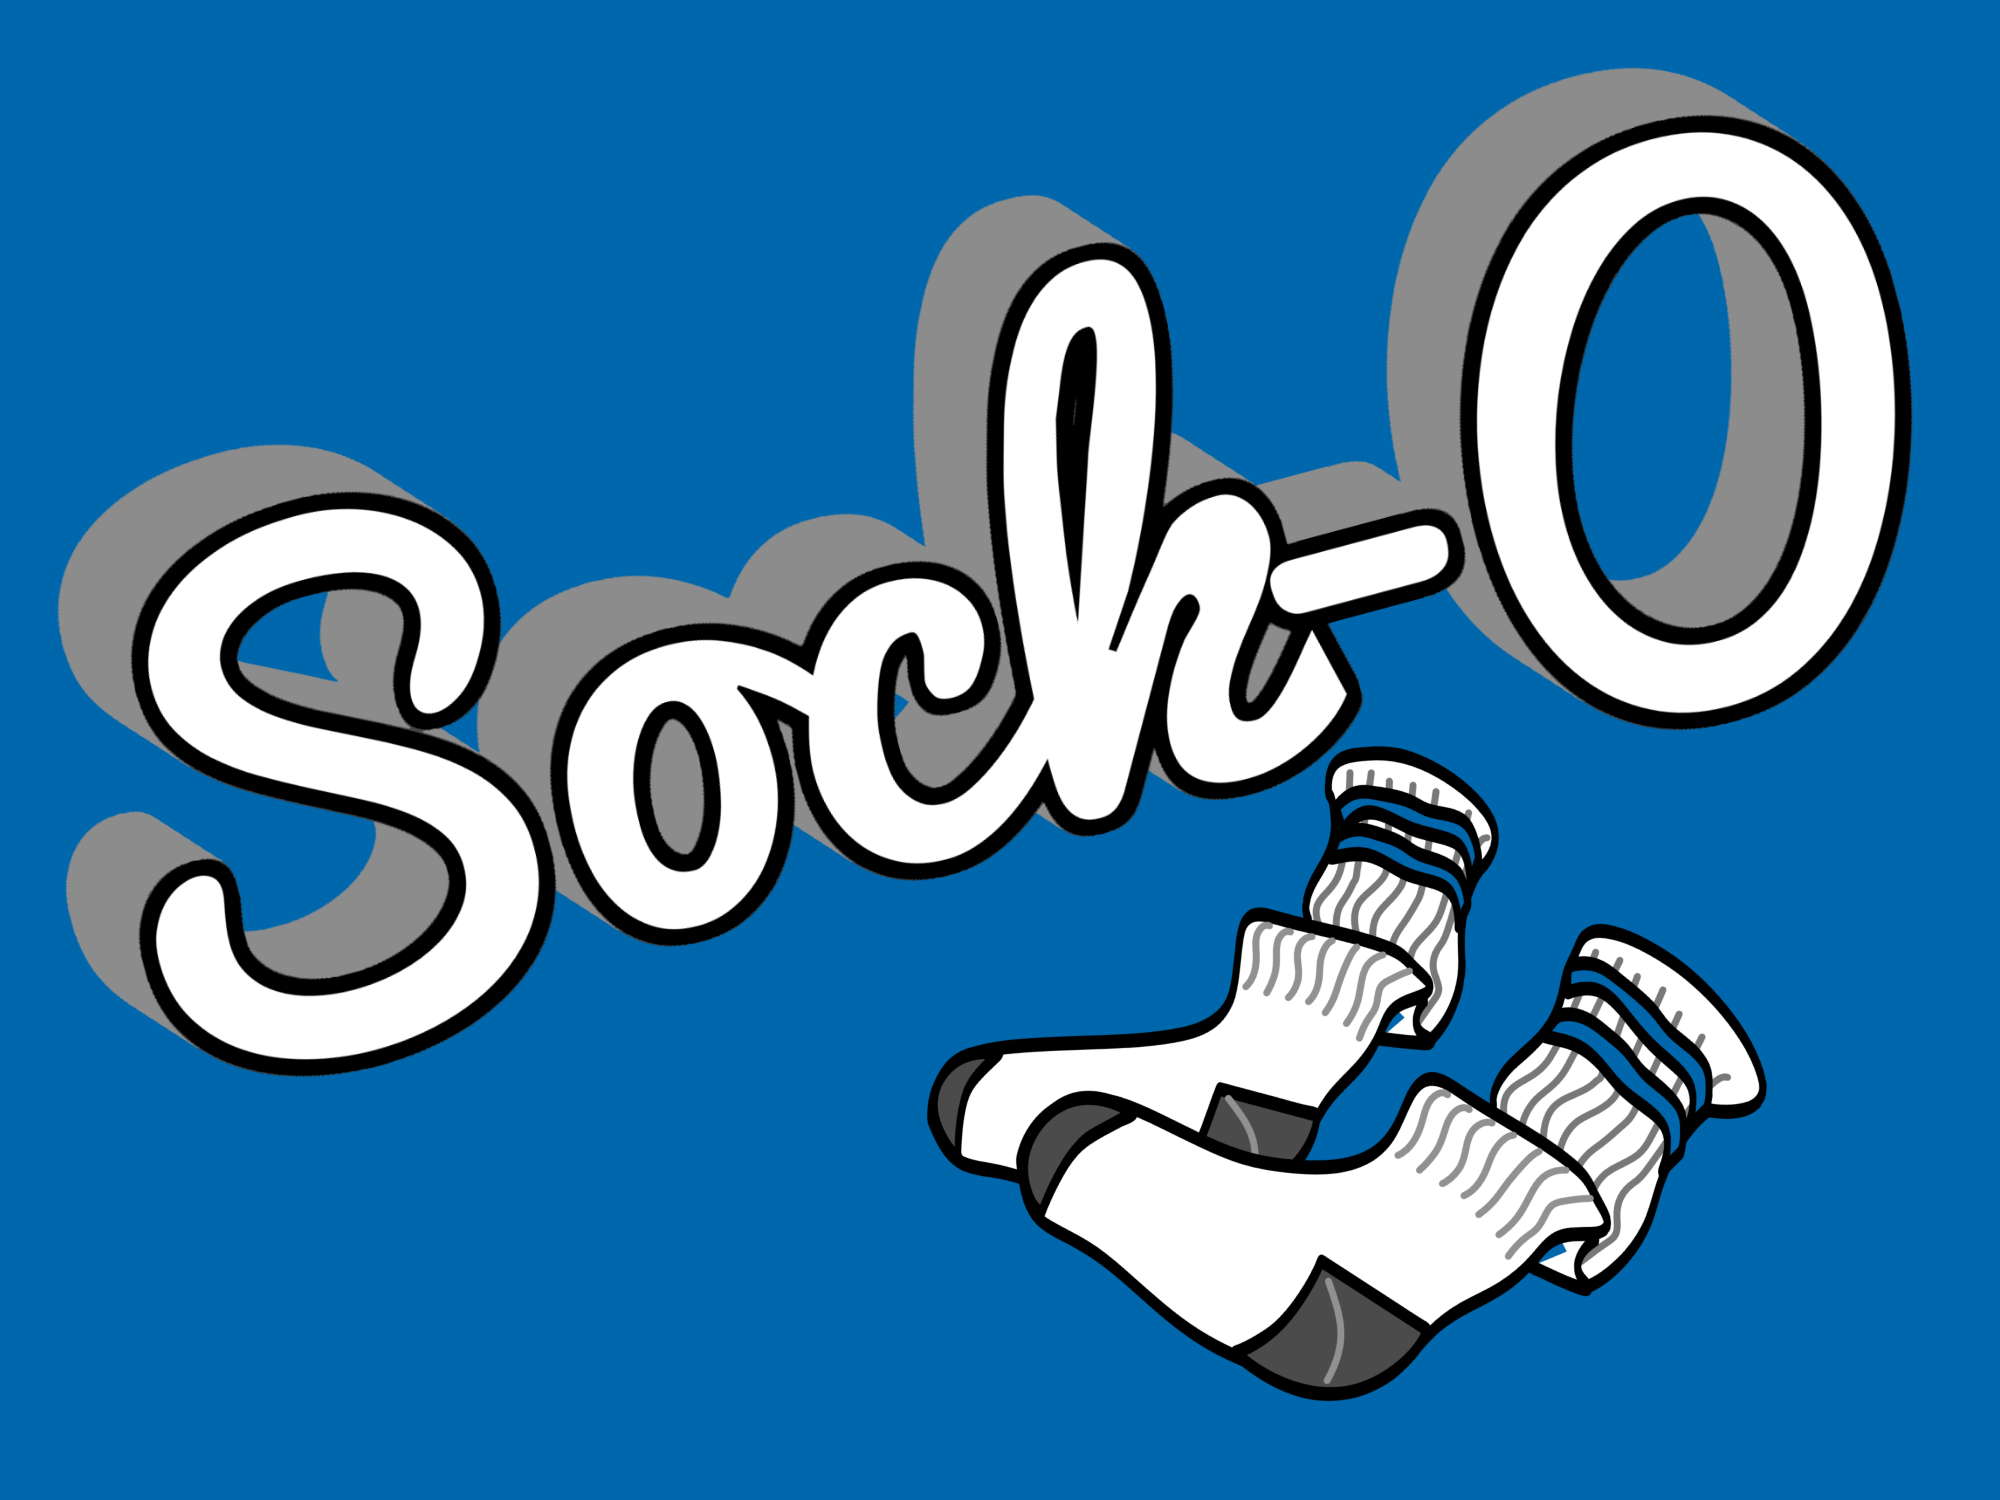 SockO SD.png